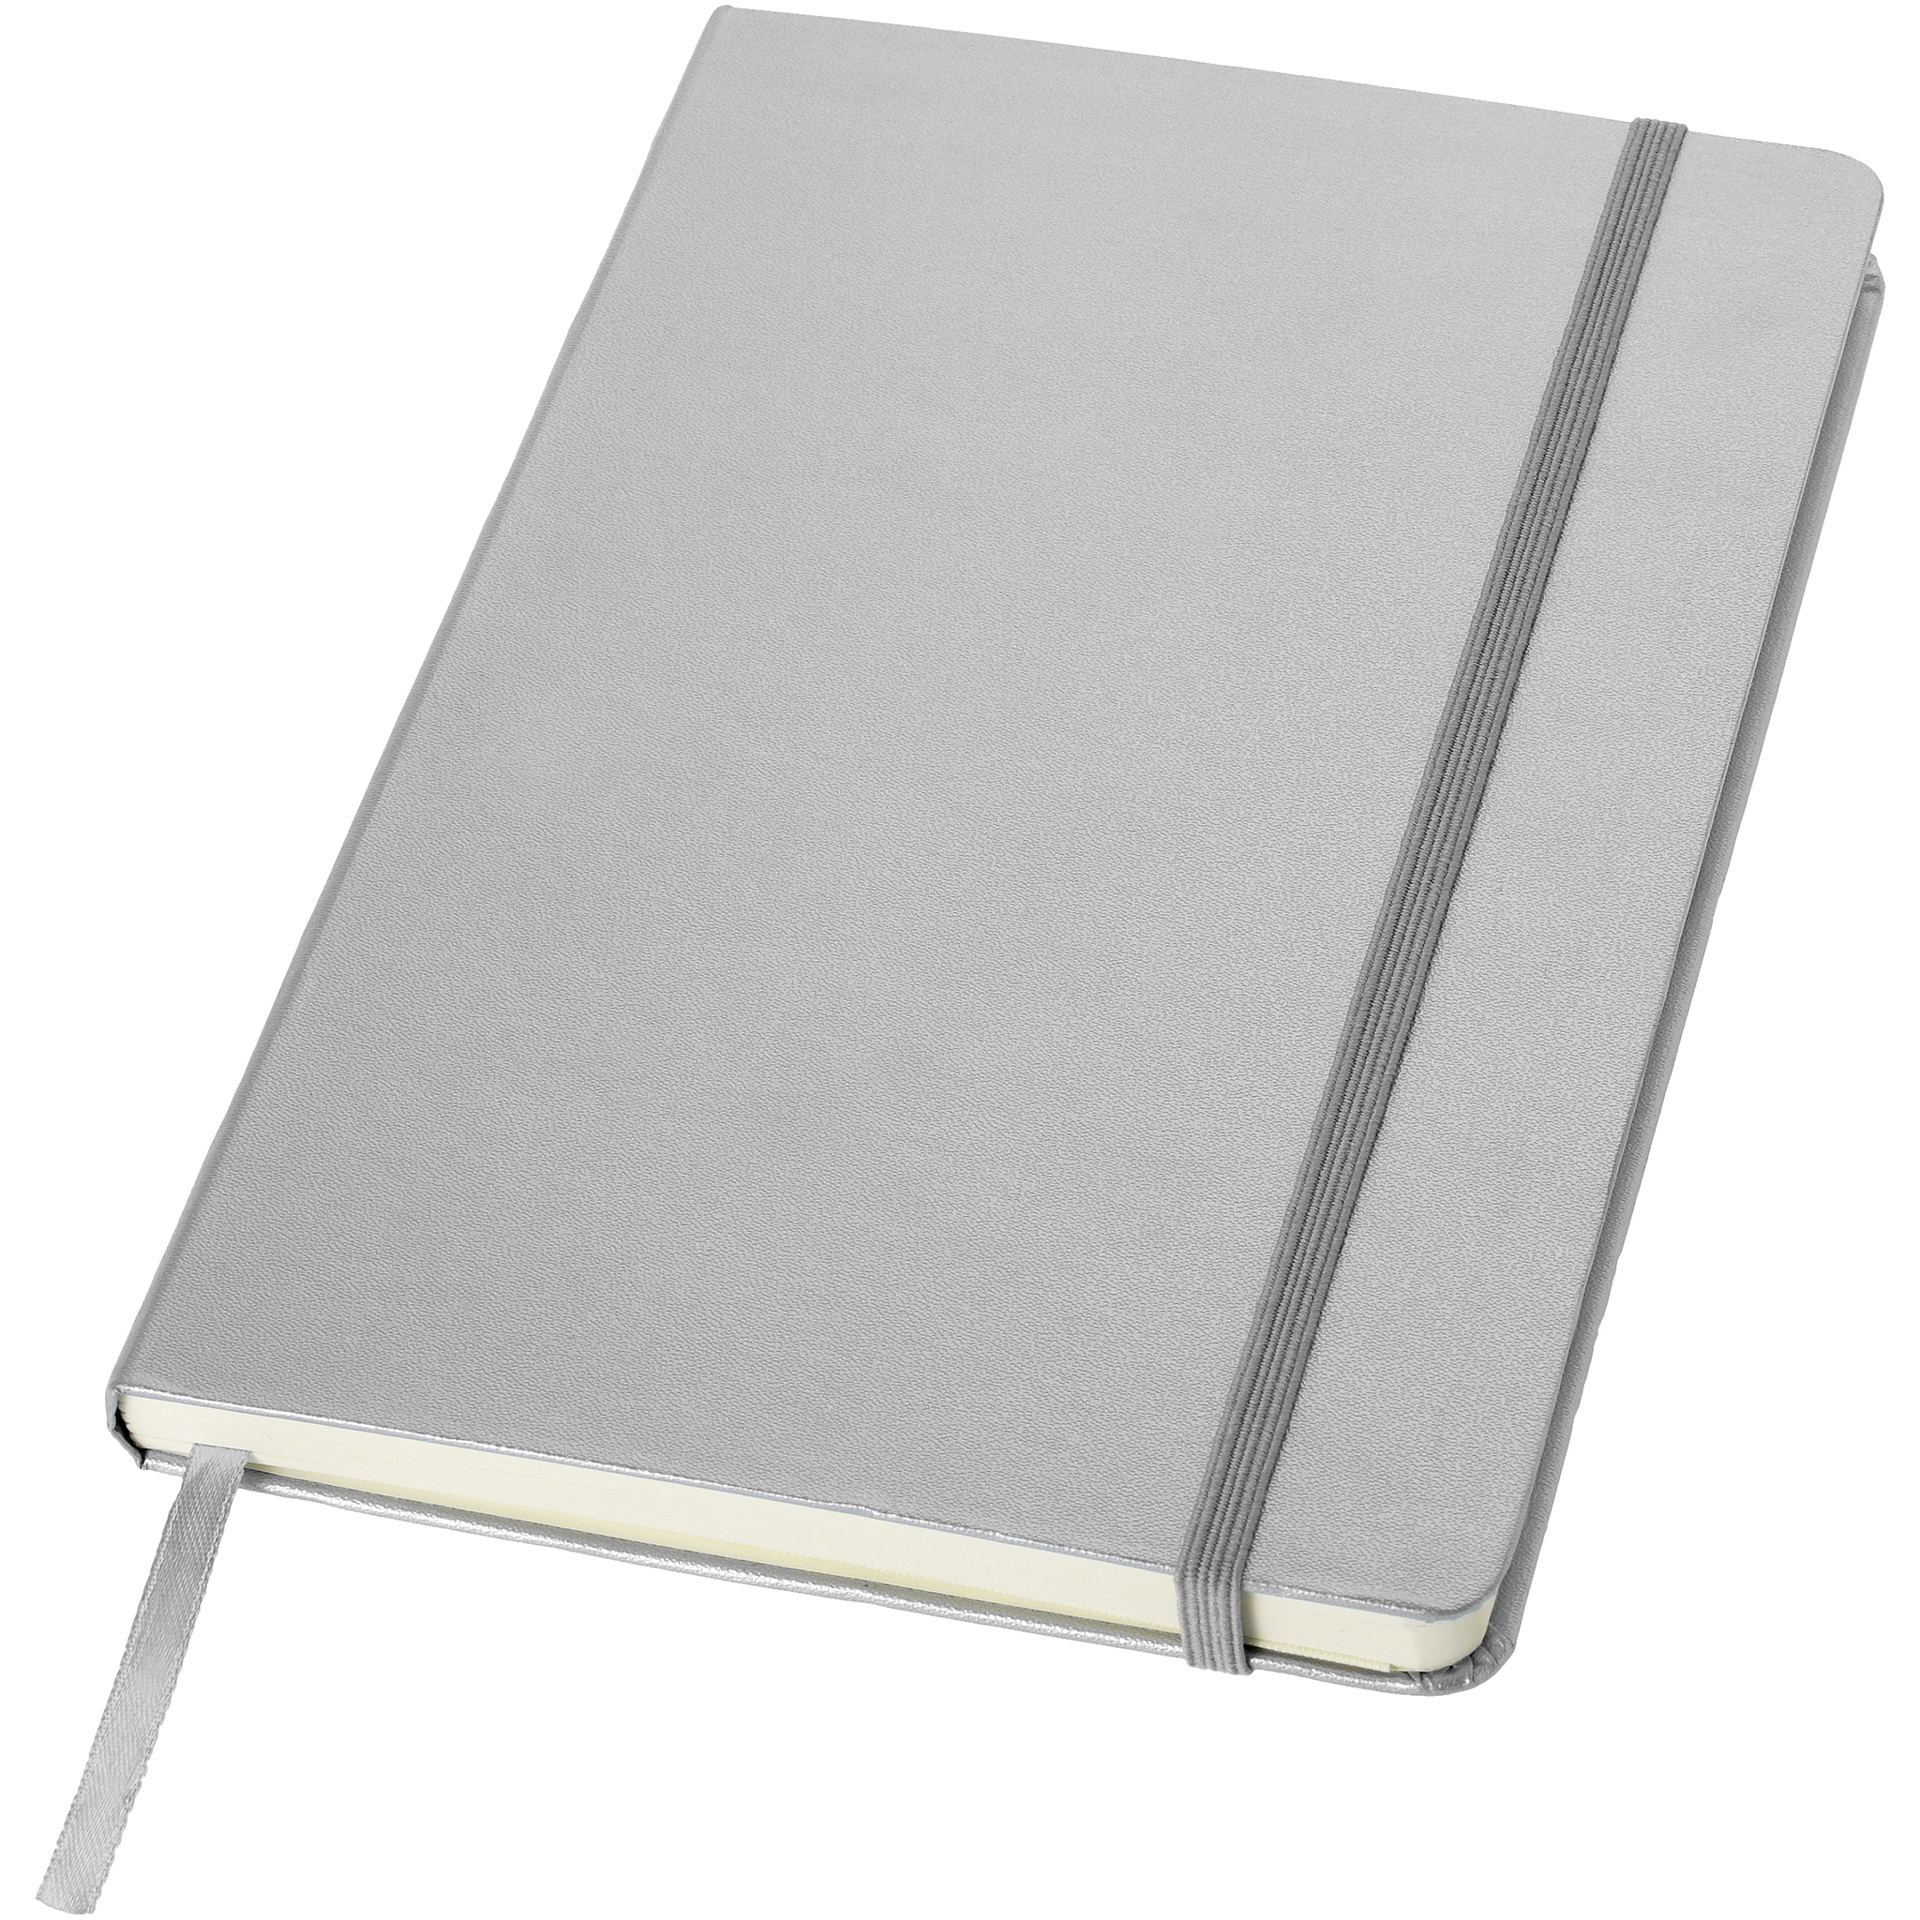 A5 hard cover notebook in silver with silver elastic closure and ribbon